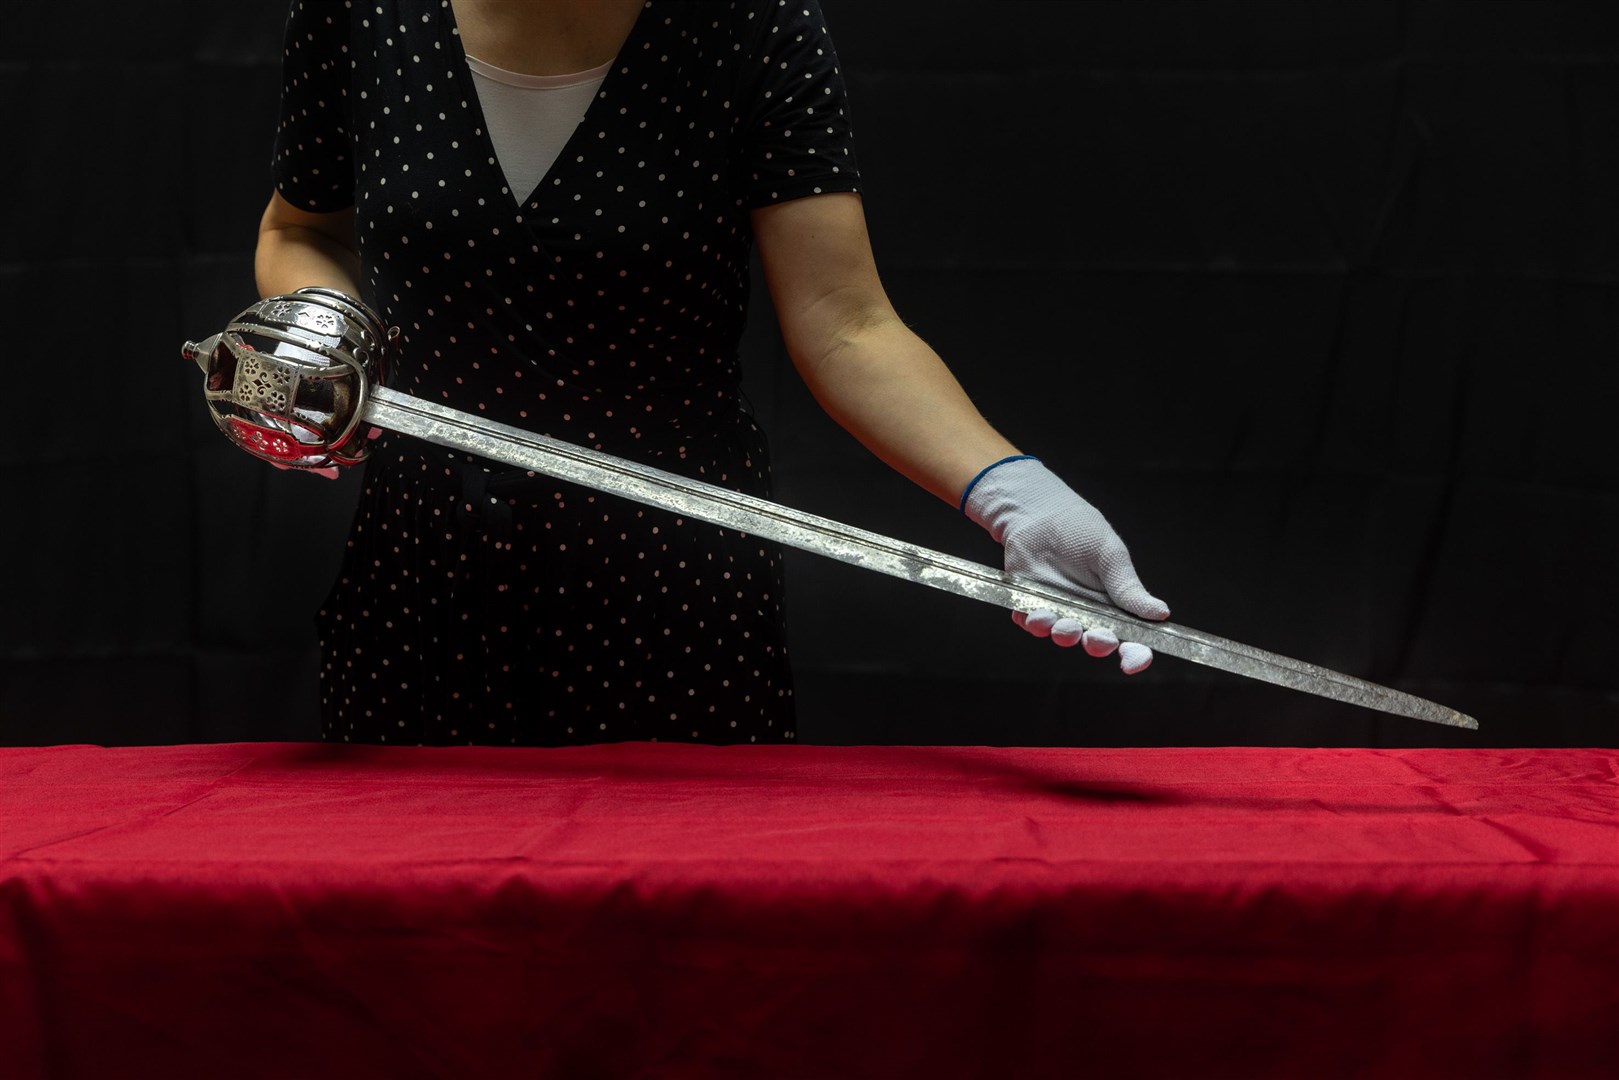 The sword dates back to 1739 (Benedict Johnson/Perth Museum/PA)